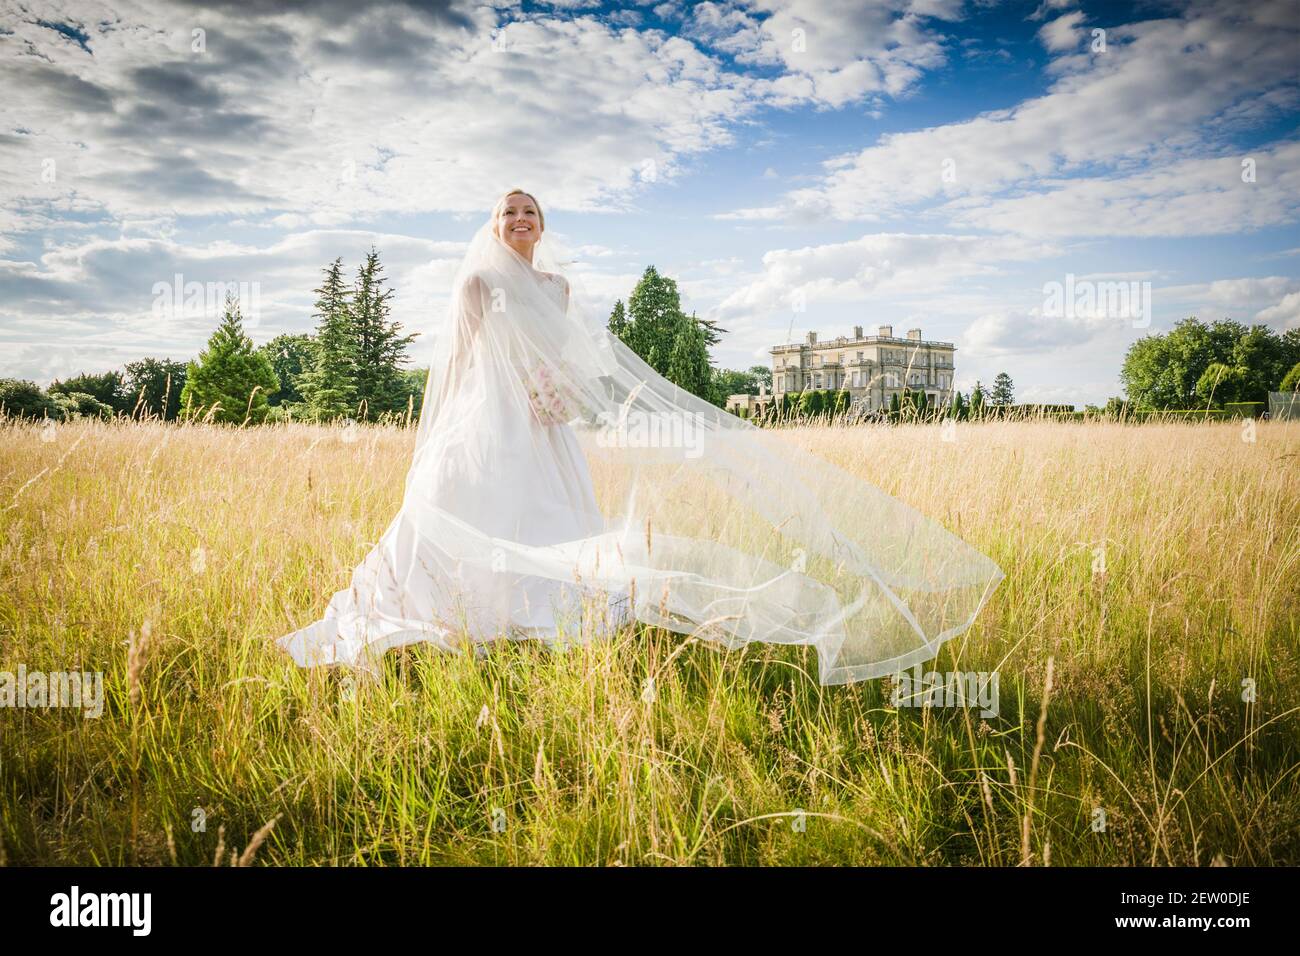 Bride standing in long grass field smiling with happiness Stock Photo